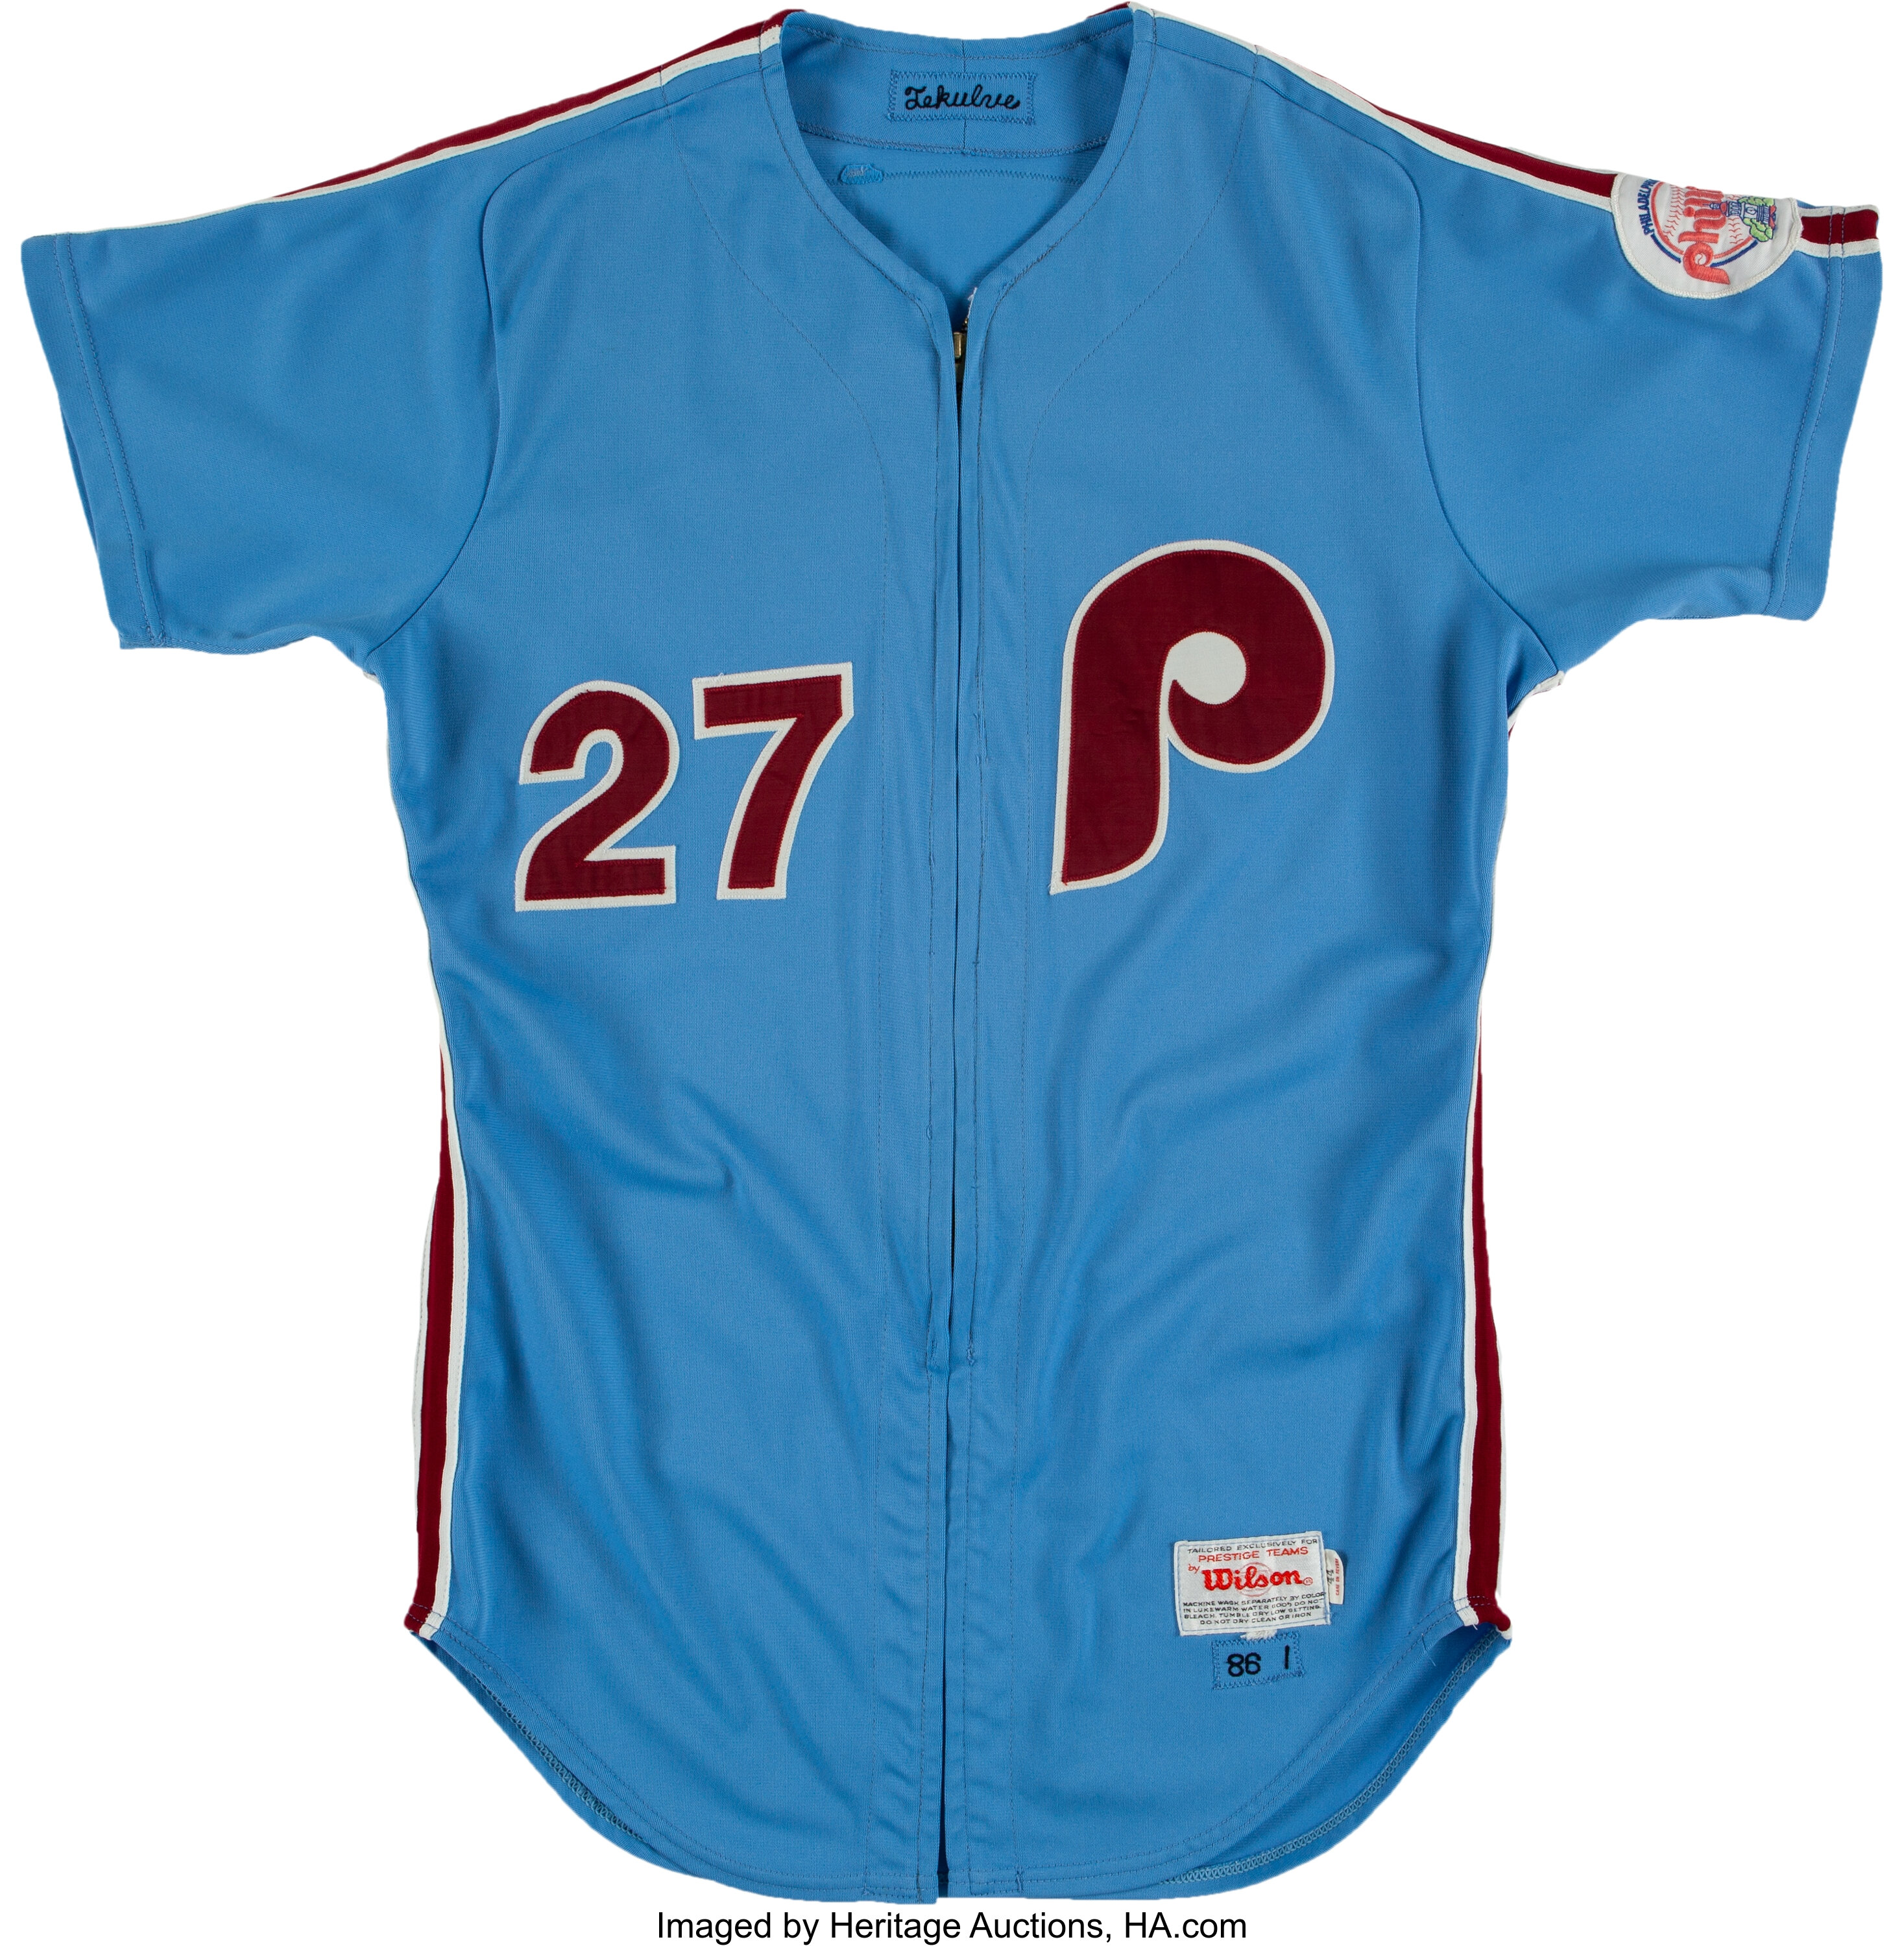 phillies jersey, phillies jersey Suppliers and Manufacturers at